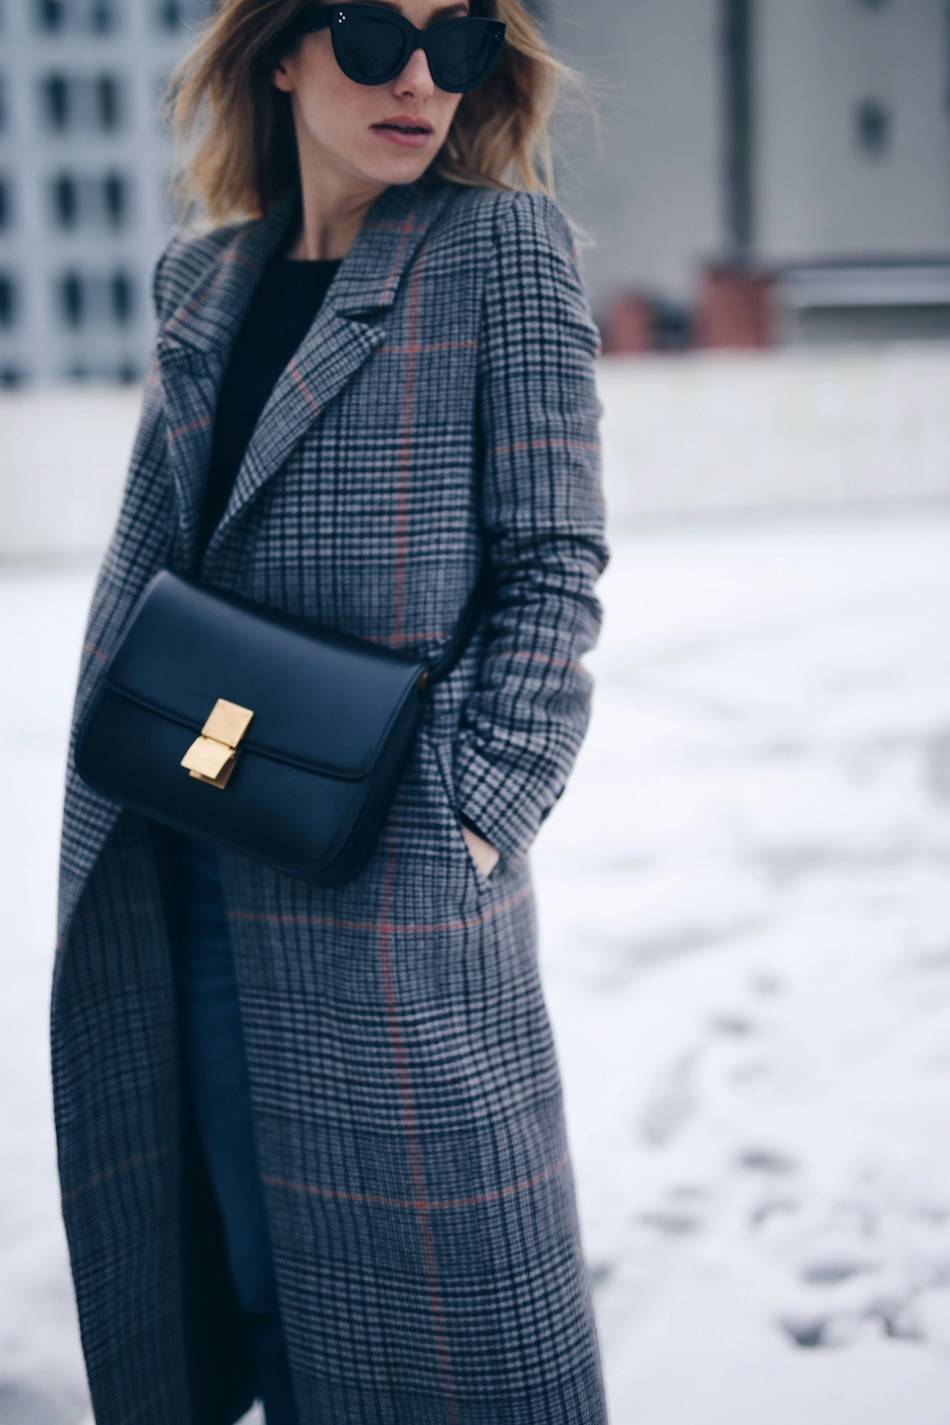 Style and beauty blogger Jill Lansky of The August Diaries in H&M plaid coat with Celine black box bag and Celine Caty sunglasses